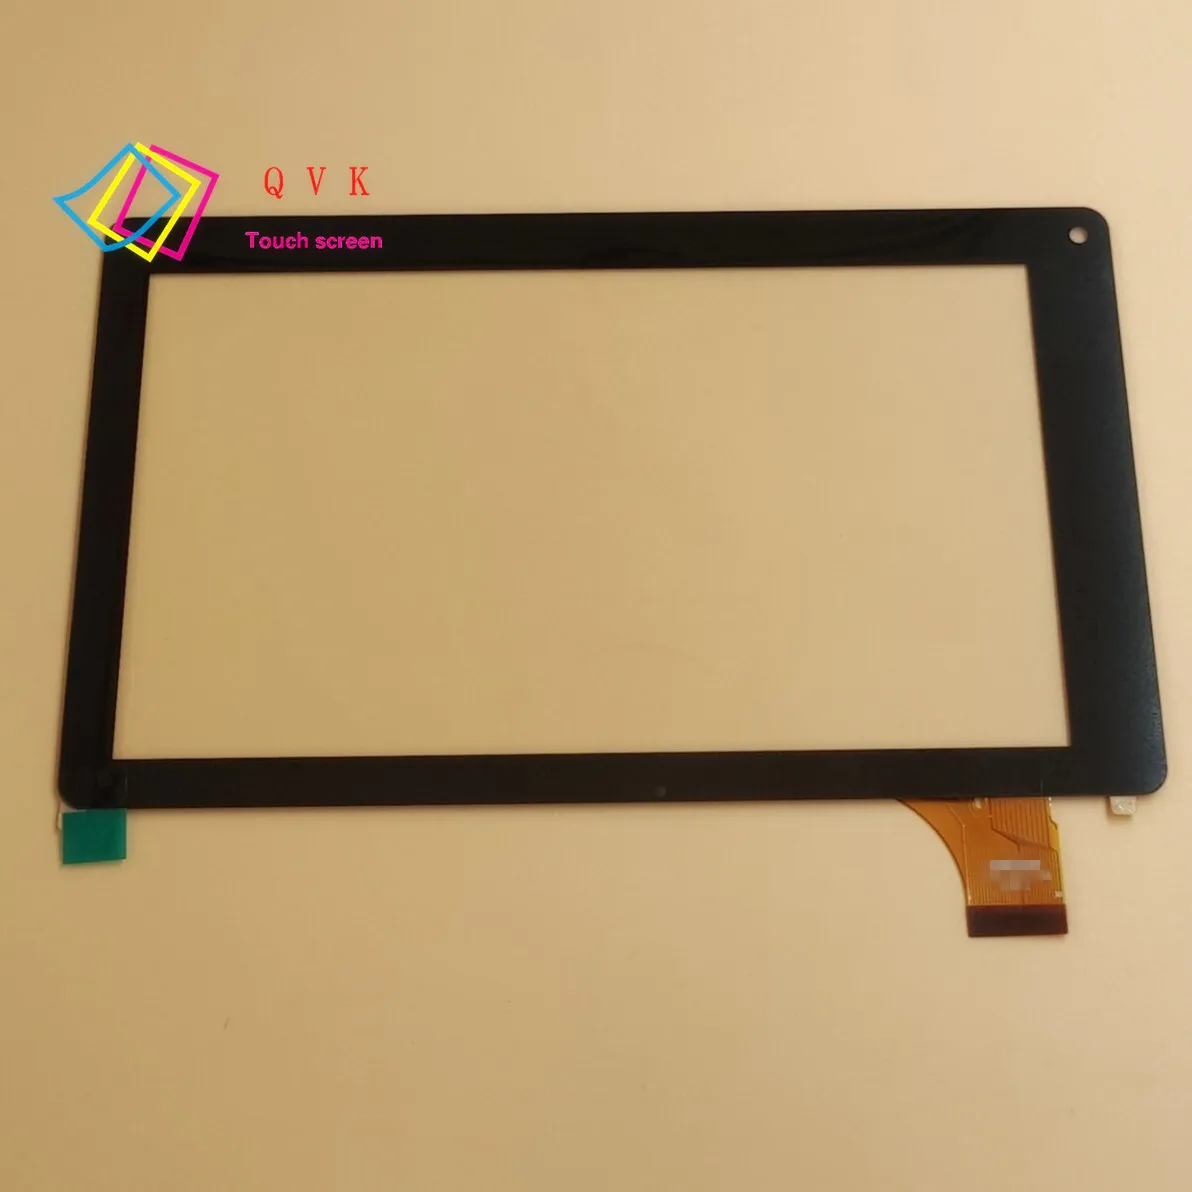 

7inch Black P/N WJ609-V3.0 TPT-070-346 Tablet PC Capacitive Touch Screen Digitizer Sensor For RCA RCT6773W22